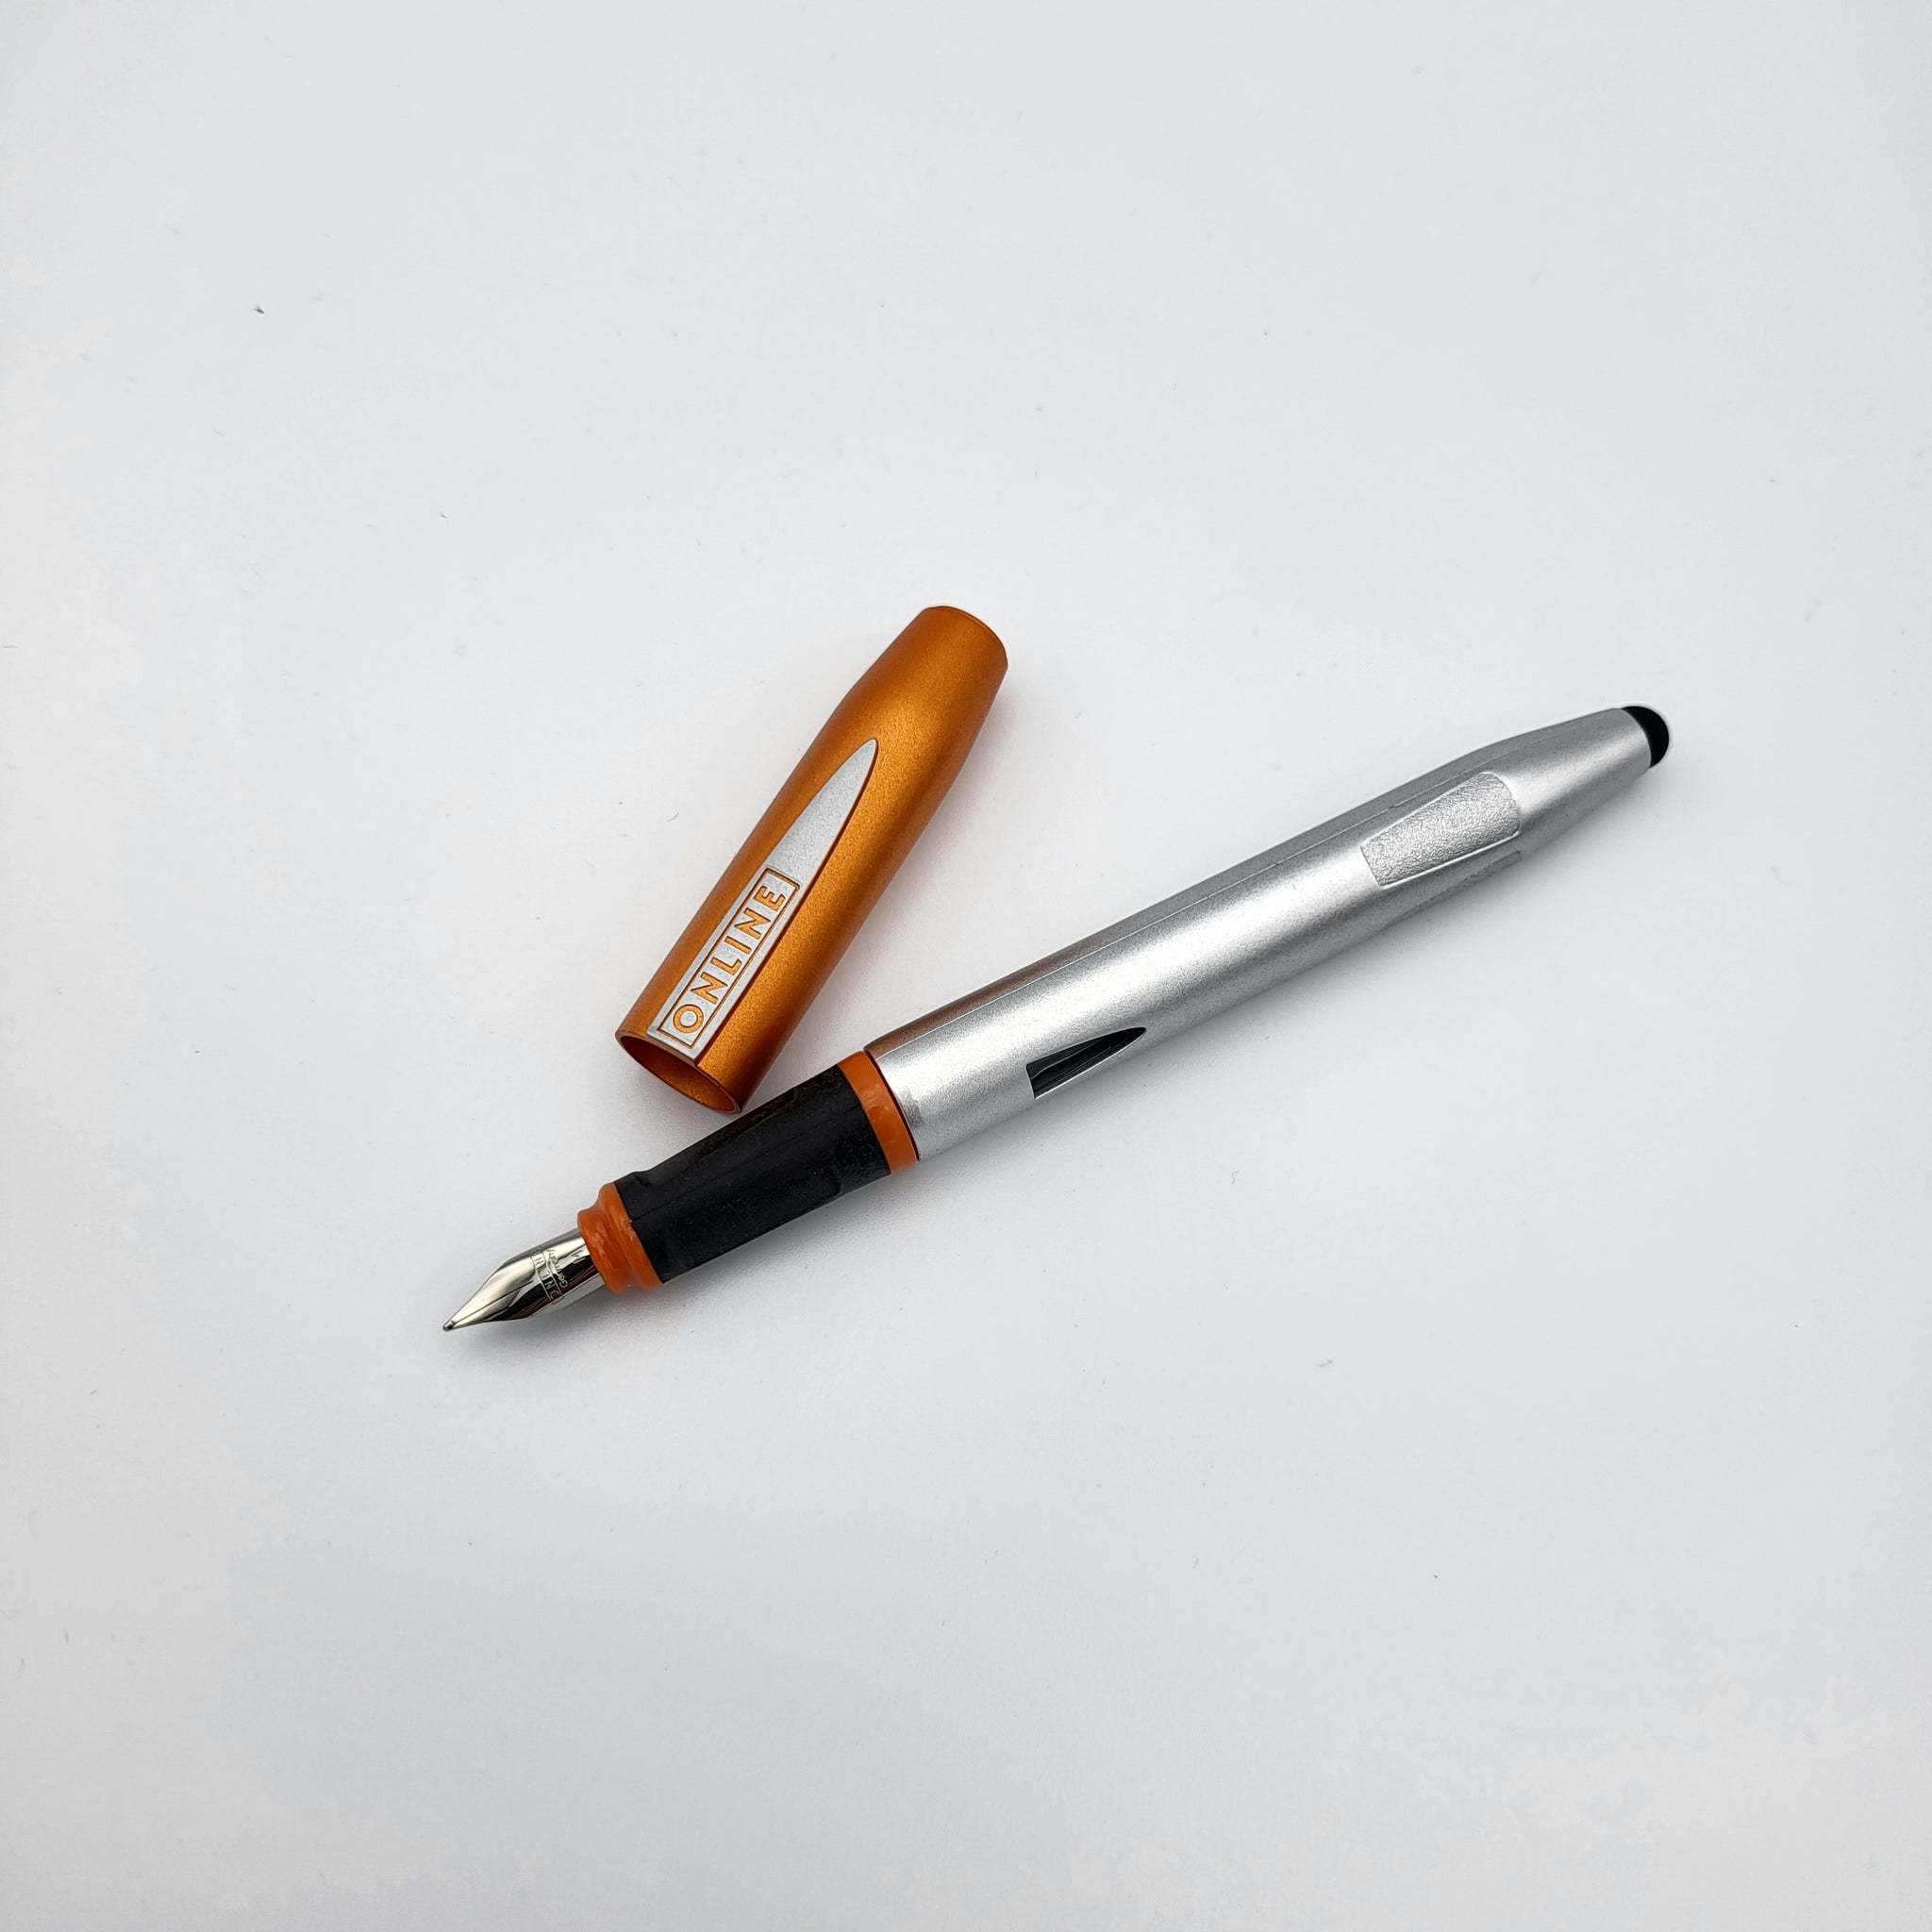 ONLINE of Germany ONLINE of Germany "Switch" Fountain Pen/Touchscreen Stylus - Orange/Satin Silver freeshipping - RiNo Distribution